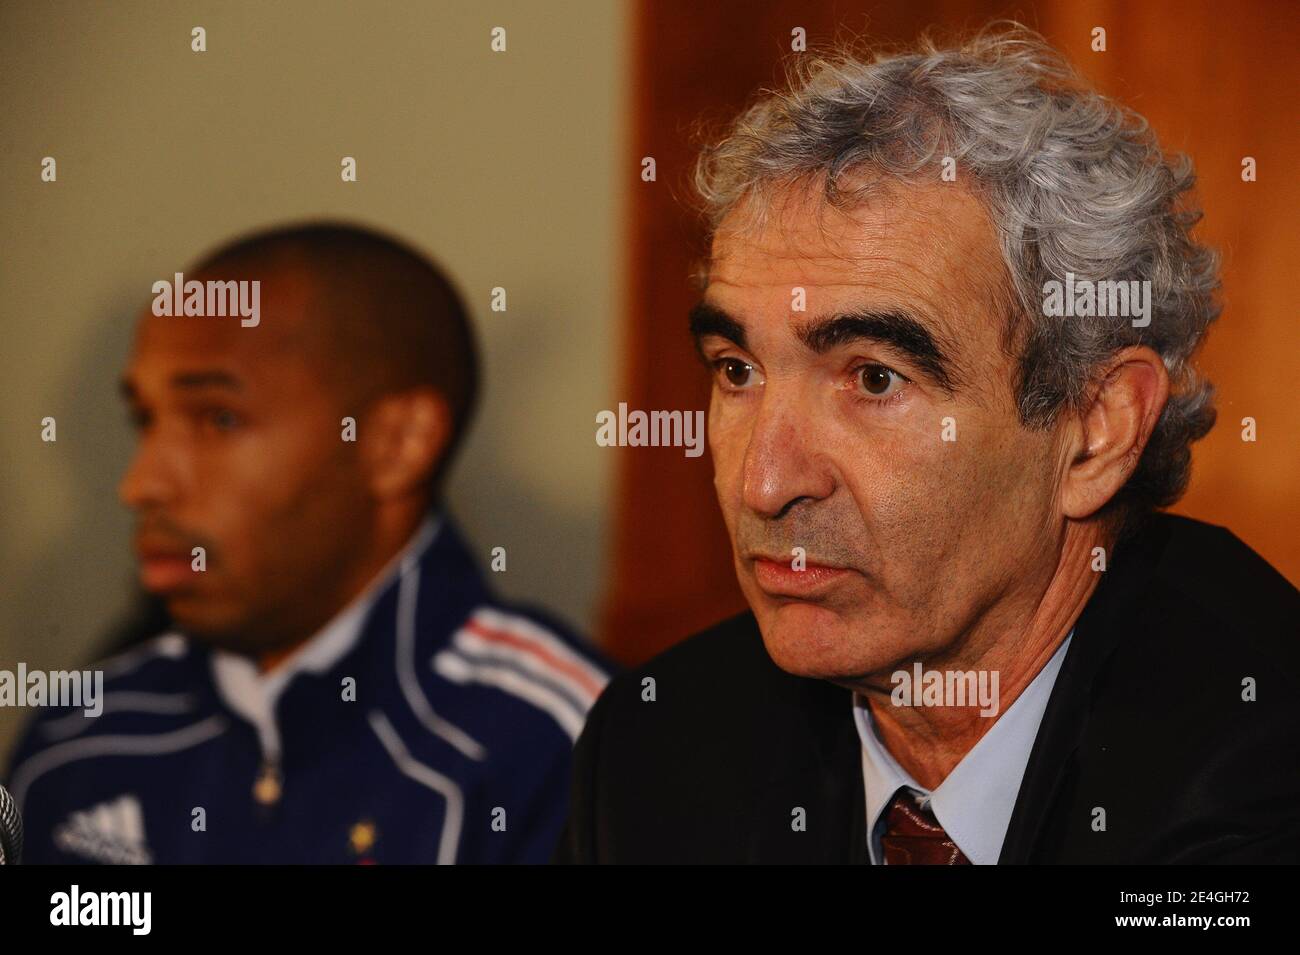 France's coach Raymond Domenech and France's captain Thierry Henry during a press conference before the World Cup 2010 Qualifying soccer match, Ireland vs France at Croke Park stadium in Dublin, Ireland on November 14, 2009. Photo by Steeve McMay/ABACAPRESS.COM Stock Photo